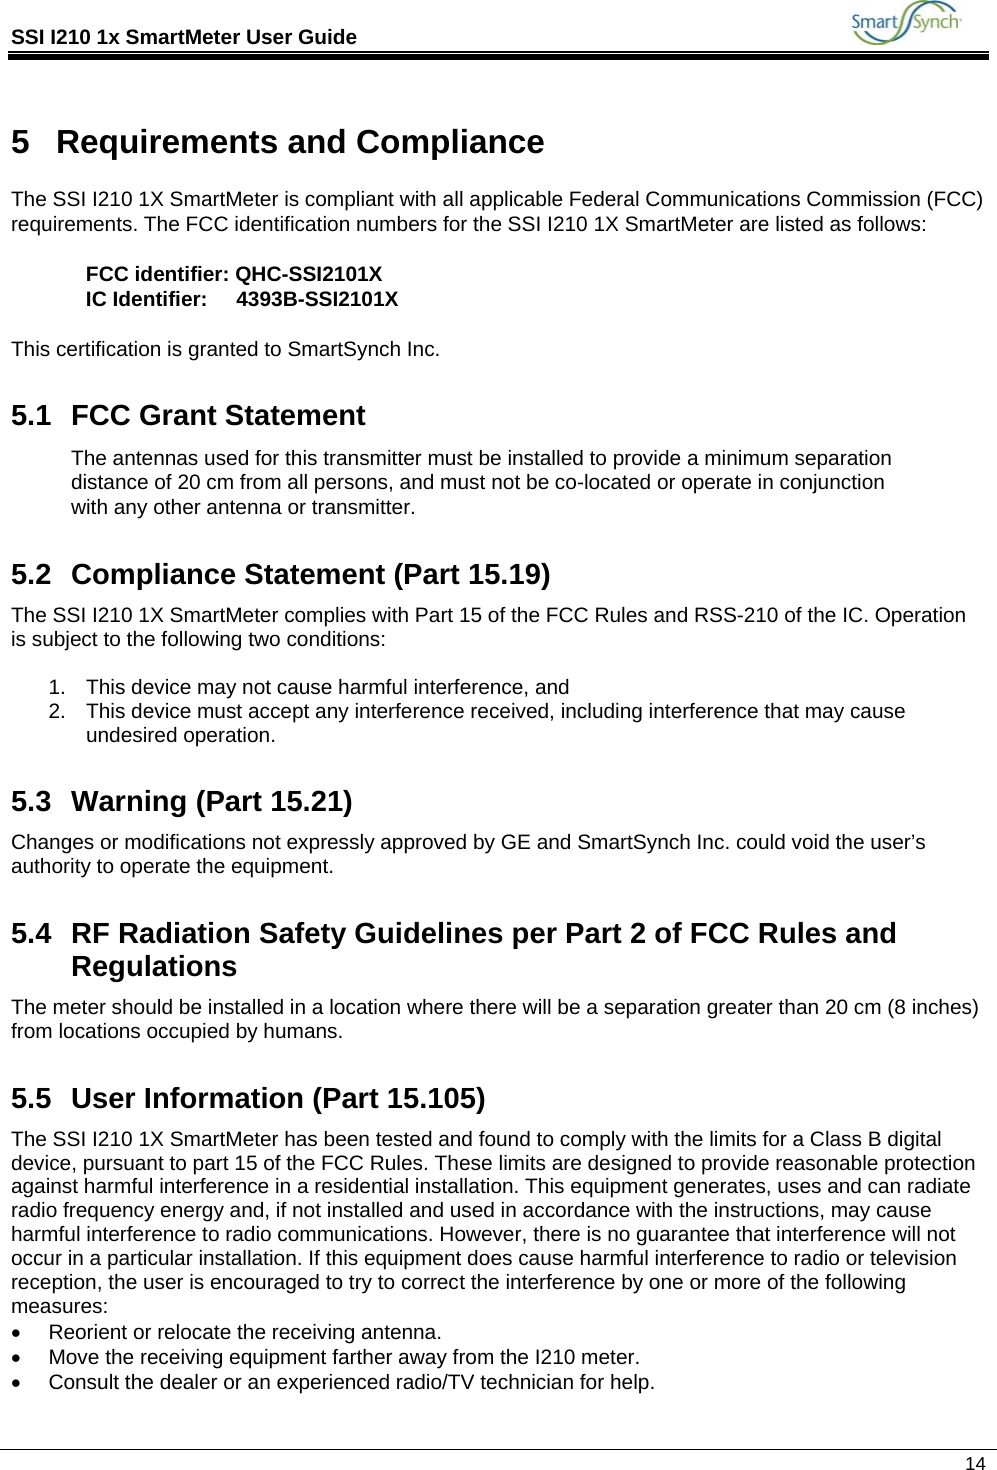 SSI I210 1x SmartMeter User Guide             14  5  Requirements and Compliance The SSI I210 1X SmartMeter is compliant with all applicable Federal Communications Commission (FCC) requirements. The FCC identification numbers for the SSI I210 1X SmartMeter are listed as follows:  FCC identifier: QHC-SSI2101X IC Identifier:     4393B-SSI2101X  This certification is granted to SmartSynch Inc. 5.1  FCC Grant Statement The antennas used for this transmitter must be installed to provide a minimum separation distance of 20 cm from all persons, and must not be co-located or operate in conjunction with any other antenna or transmitter.  5.2  Compliance Statement (Part 15.19) The SSI I210 1X SmartMeter complies with Part 15 of the FCC Rules and RSS-210 of the IC. Operation is subject to the following two conditions:  1.  This device may not cause harmful interference, and 2.  This device must accept any interference received, including interference that may cause undesired operation. 5.3 Warning (Part 15.21) Changes or modifications not expressly approved by GE and SmartSynch Inc. could void the user’s authority to operate the equipment. 5.4  RF Radiation Safety Guidelines per Part 2 of FCC Rules and Regulations The meter should be installed in a location where there will be a separation greater than 20 cm (8 inches) from locations occupied by humans. 5.5  User Information (Part 15.105) The SSI I210 1X SmartMeter has been tested and found to comply with the limits for a Class B digital device, pursuant to part 15 of the FCC Rules. These limits are designed to provide reasonable protection against harmful interference in a residential installation. This equipment generates, uses and can radiate radio frequency energy and, if not installed and used in accordance with the instructions, may cause harmful interference to radio communications. However, there is no guarantee that interference will not occur in a particular installation. If this equipment does cause harmful interference to radio or television reception, the user is encouraged to try to correct the interference by one or more of the following measures: •  Reorient or relocate the receiving antenna. •  Move the receiving equipment farther away from the I210 meter. •  Consult the dealer or an experienced radio/TV technician for help.  